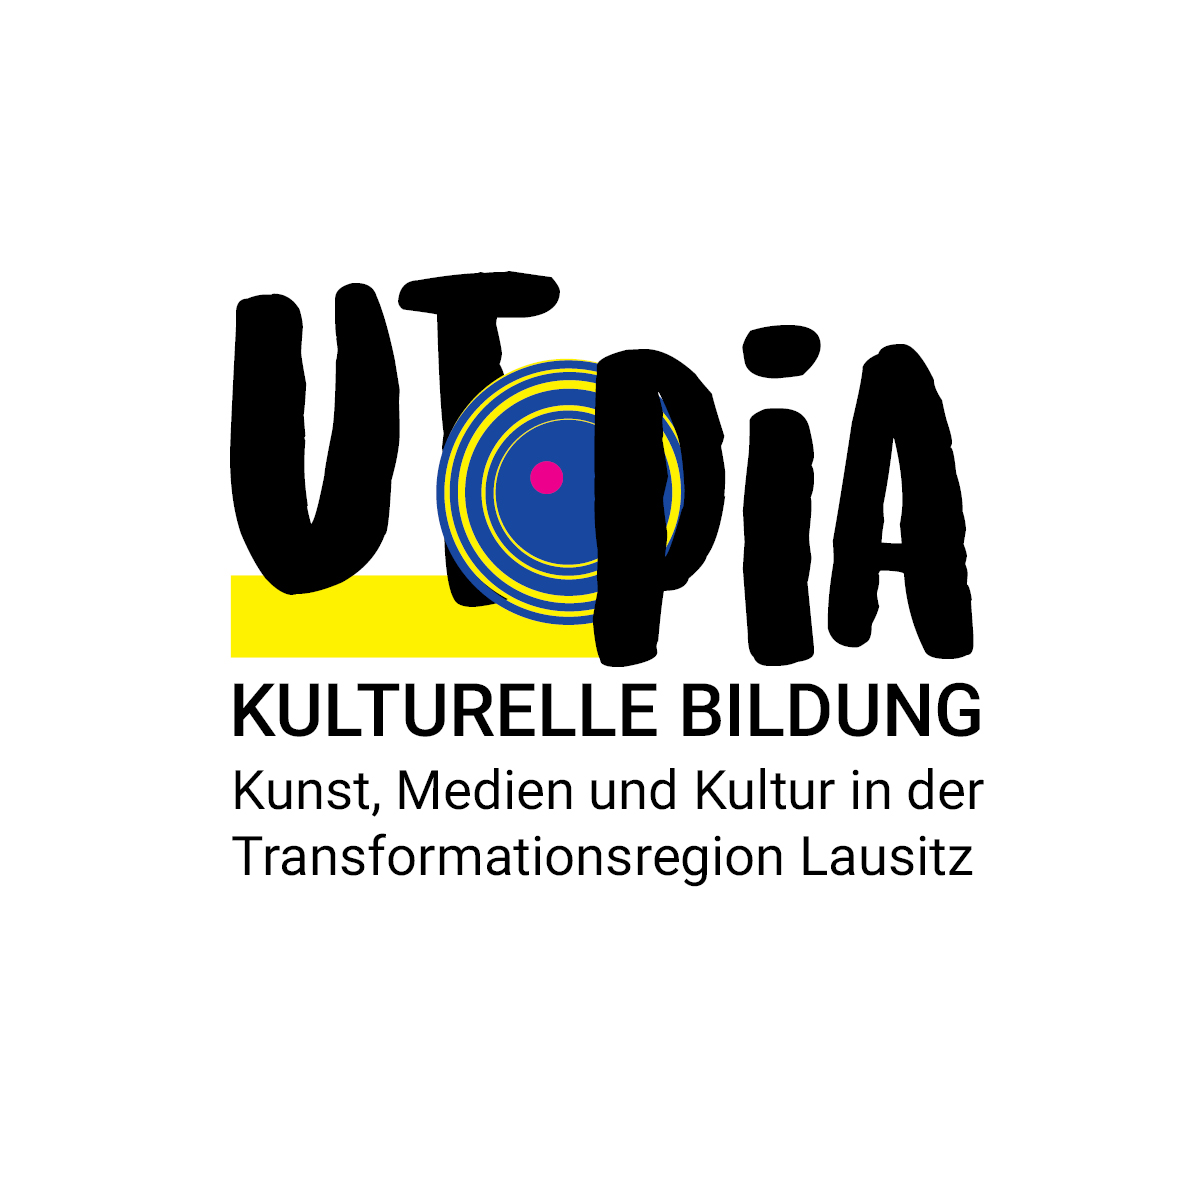 The picture shows the lettering "UTOPIA" with a blue circle between "T" and "P" and Cultural Education